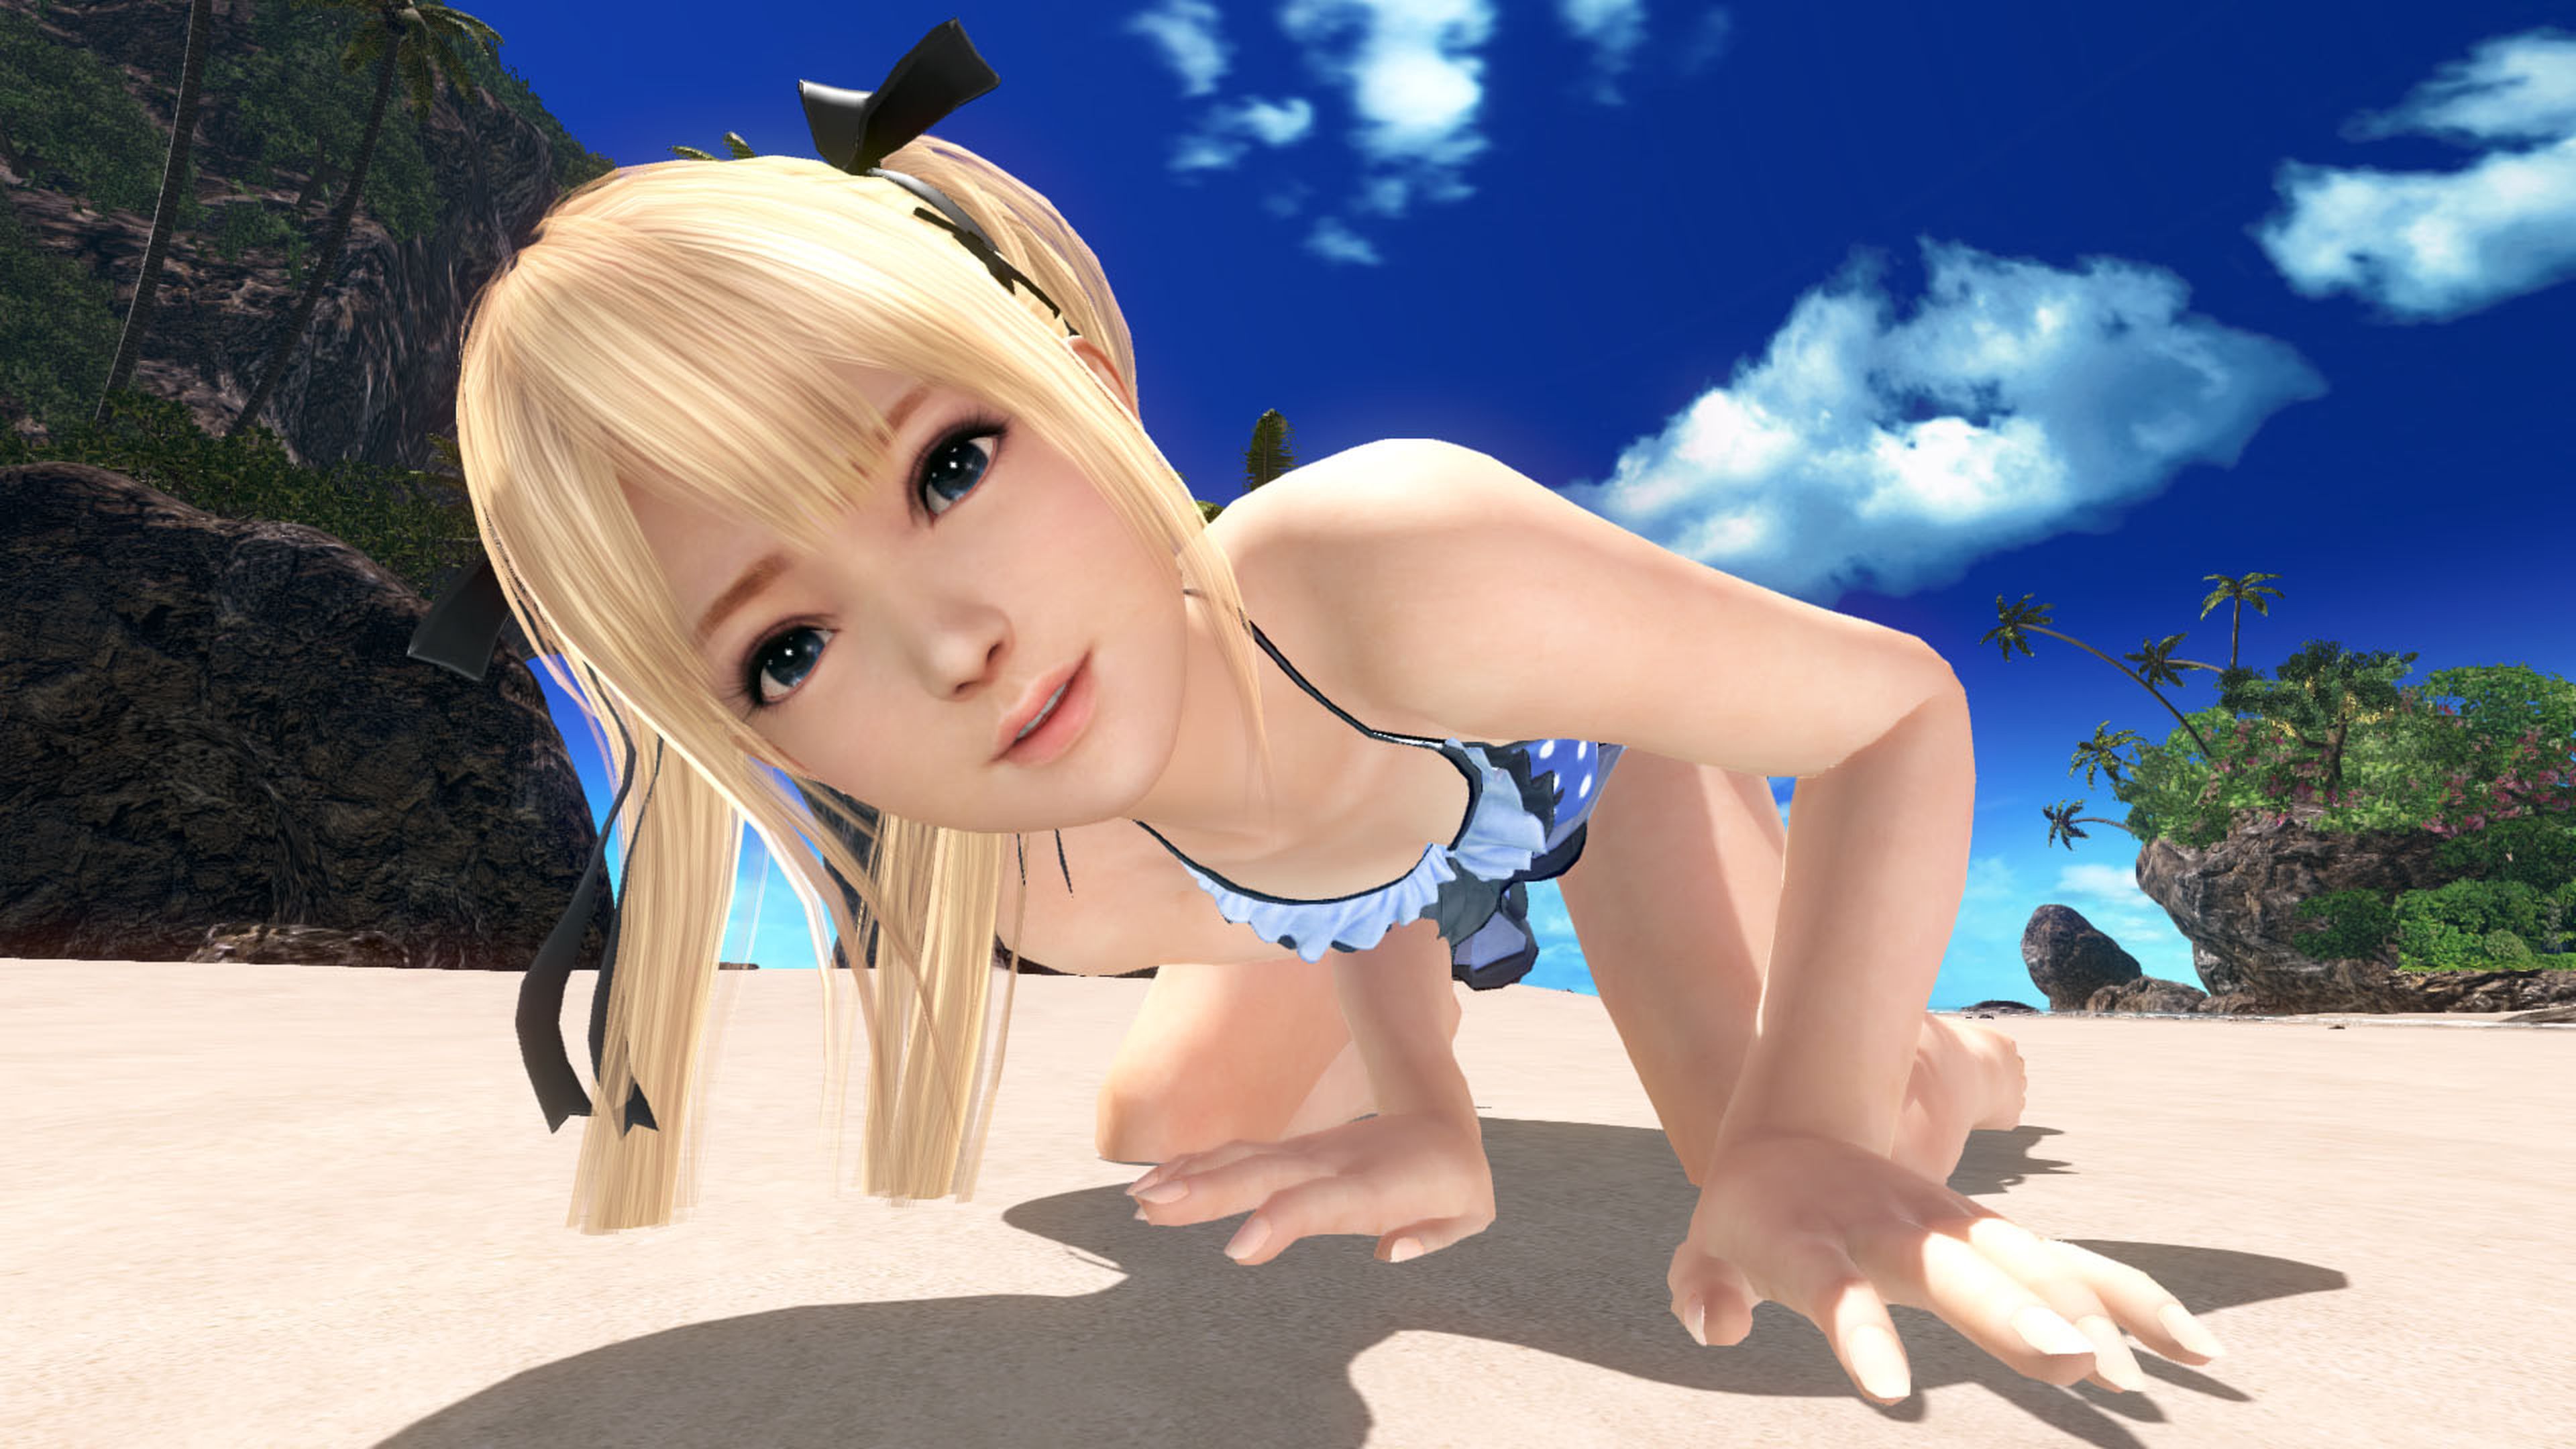 Dead or Alive Xtreme 3 PS VR